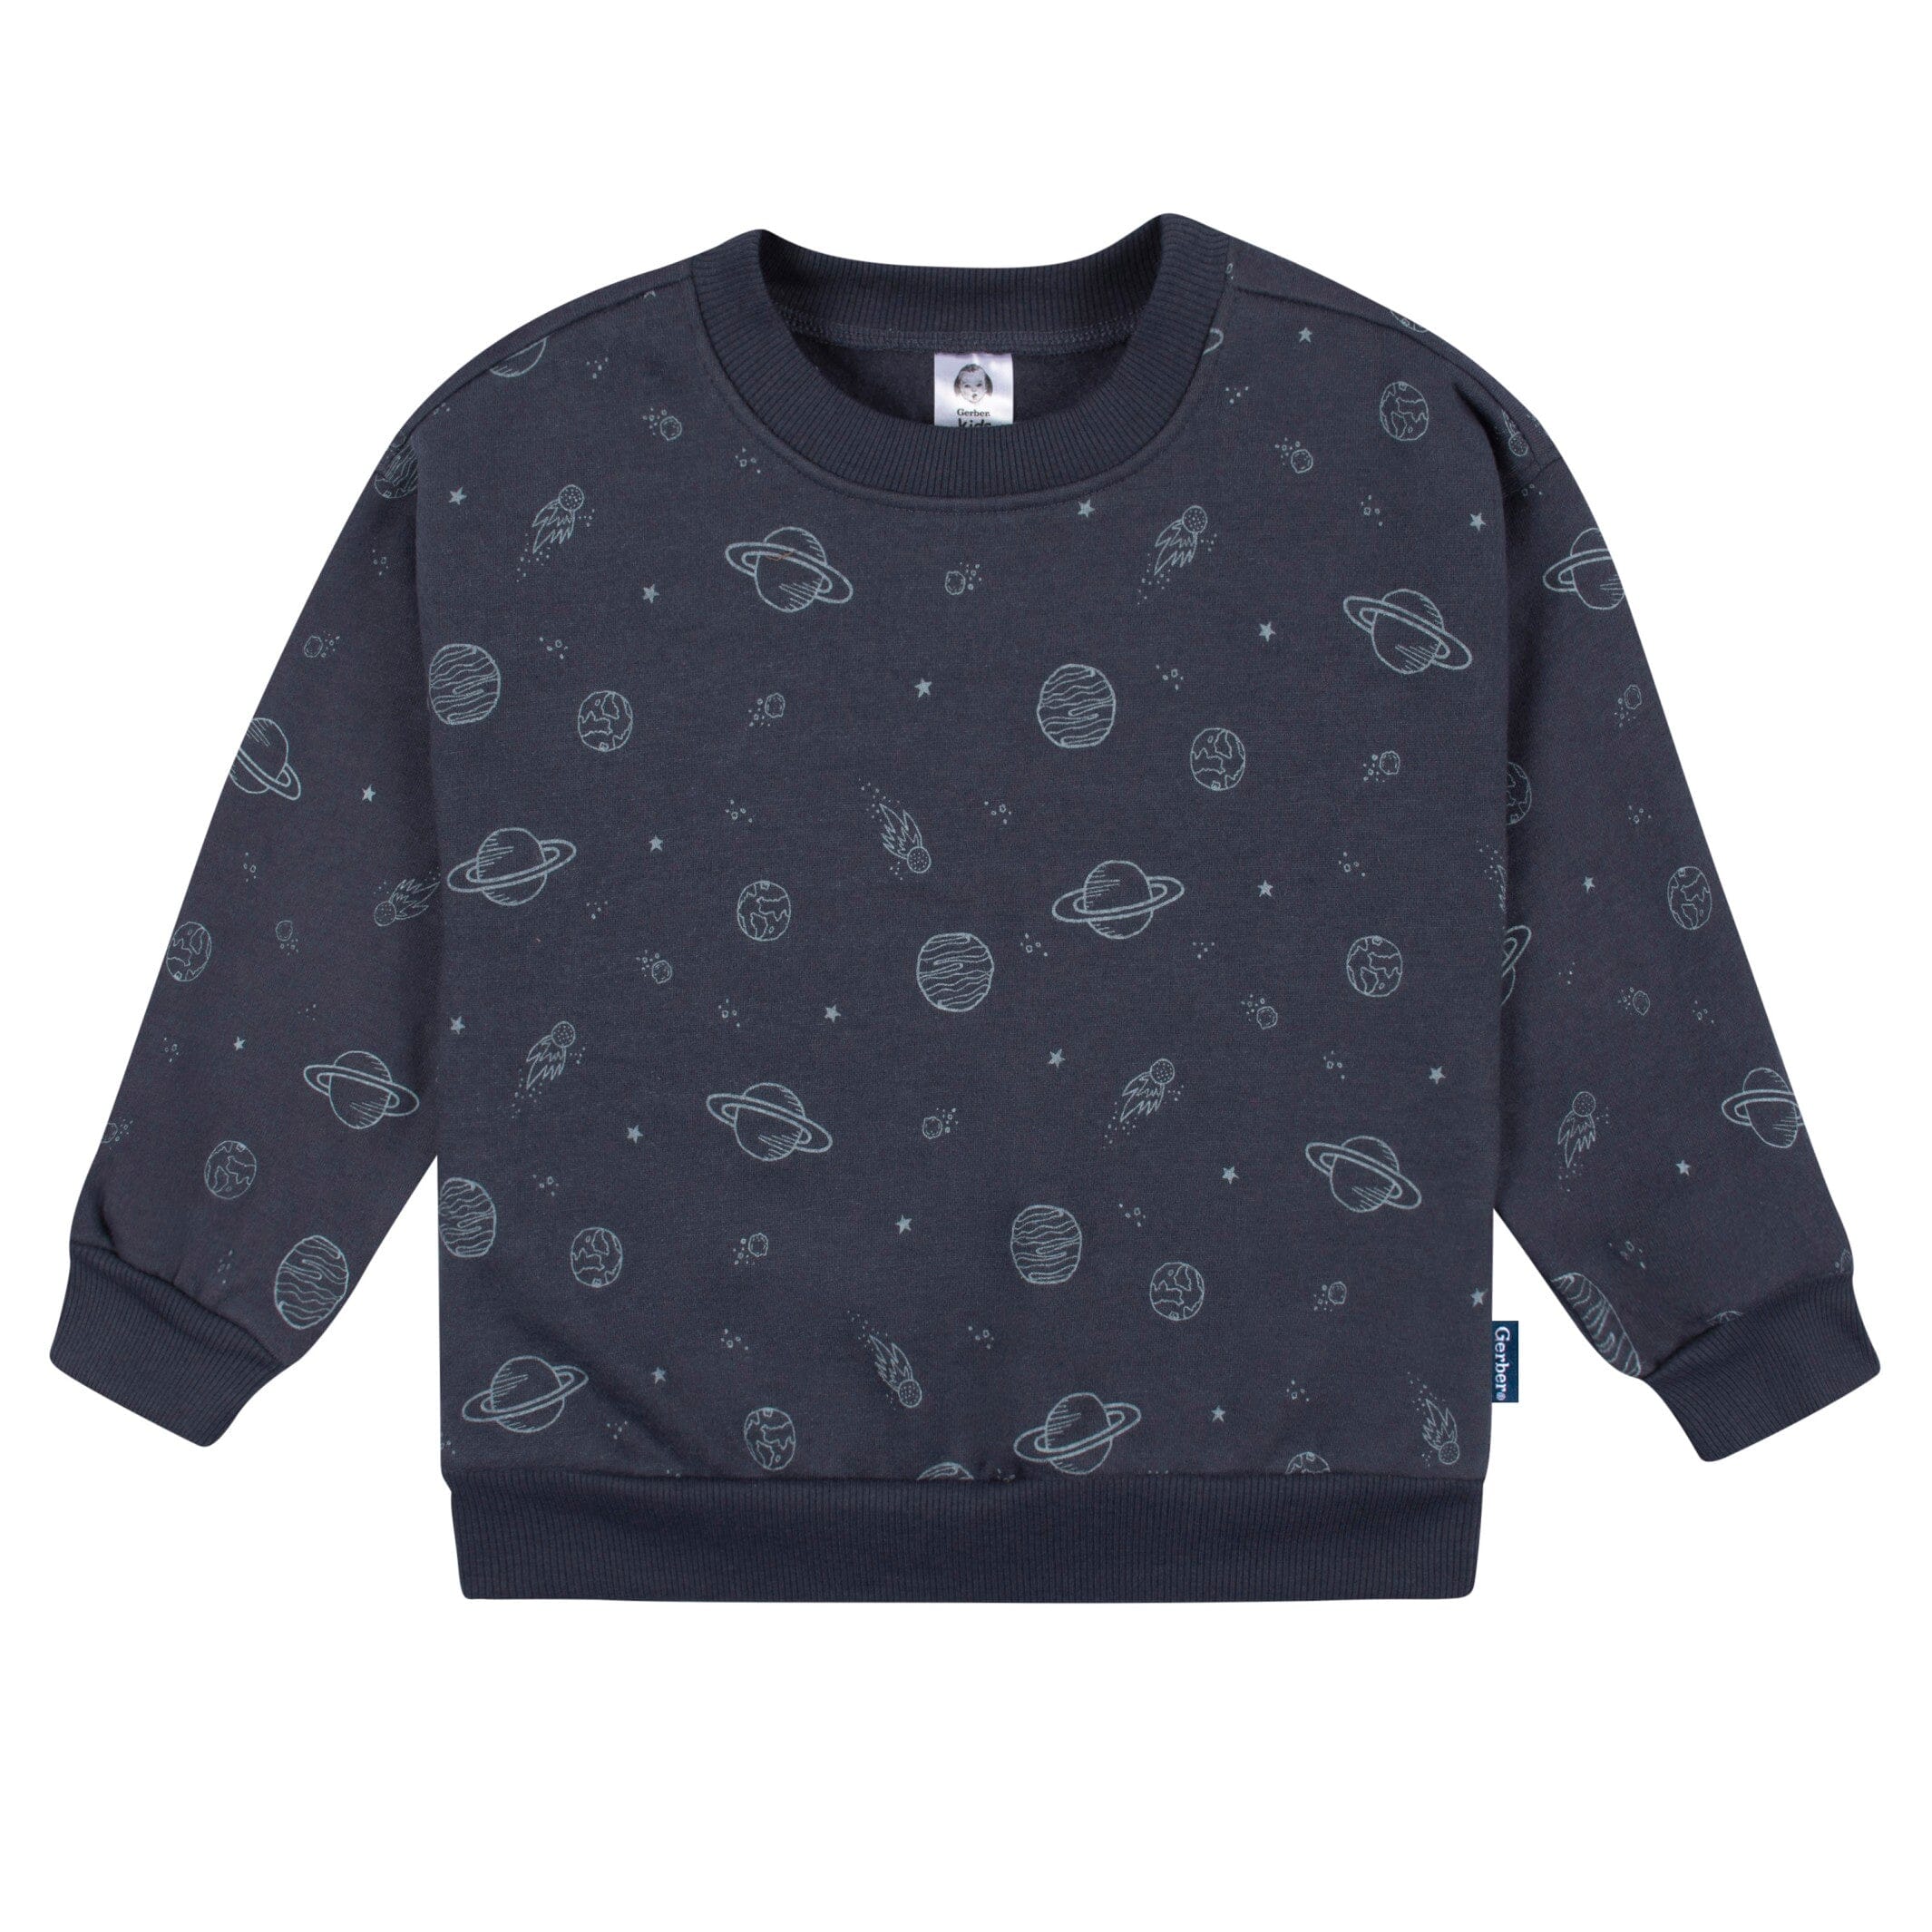 2-Piece Infant and Toddler Boys Navy Space Sweatshirt & Pant